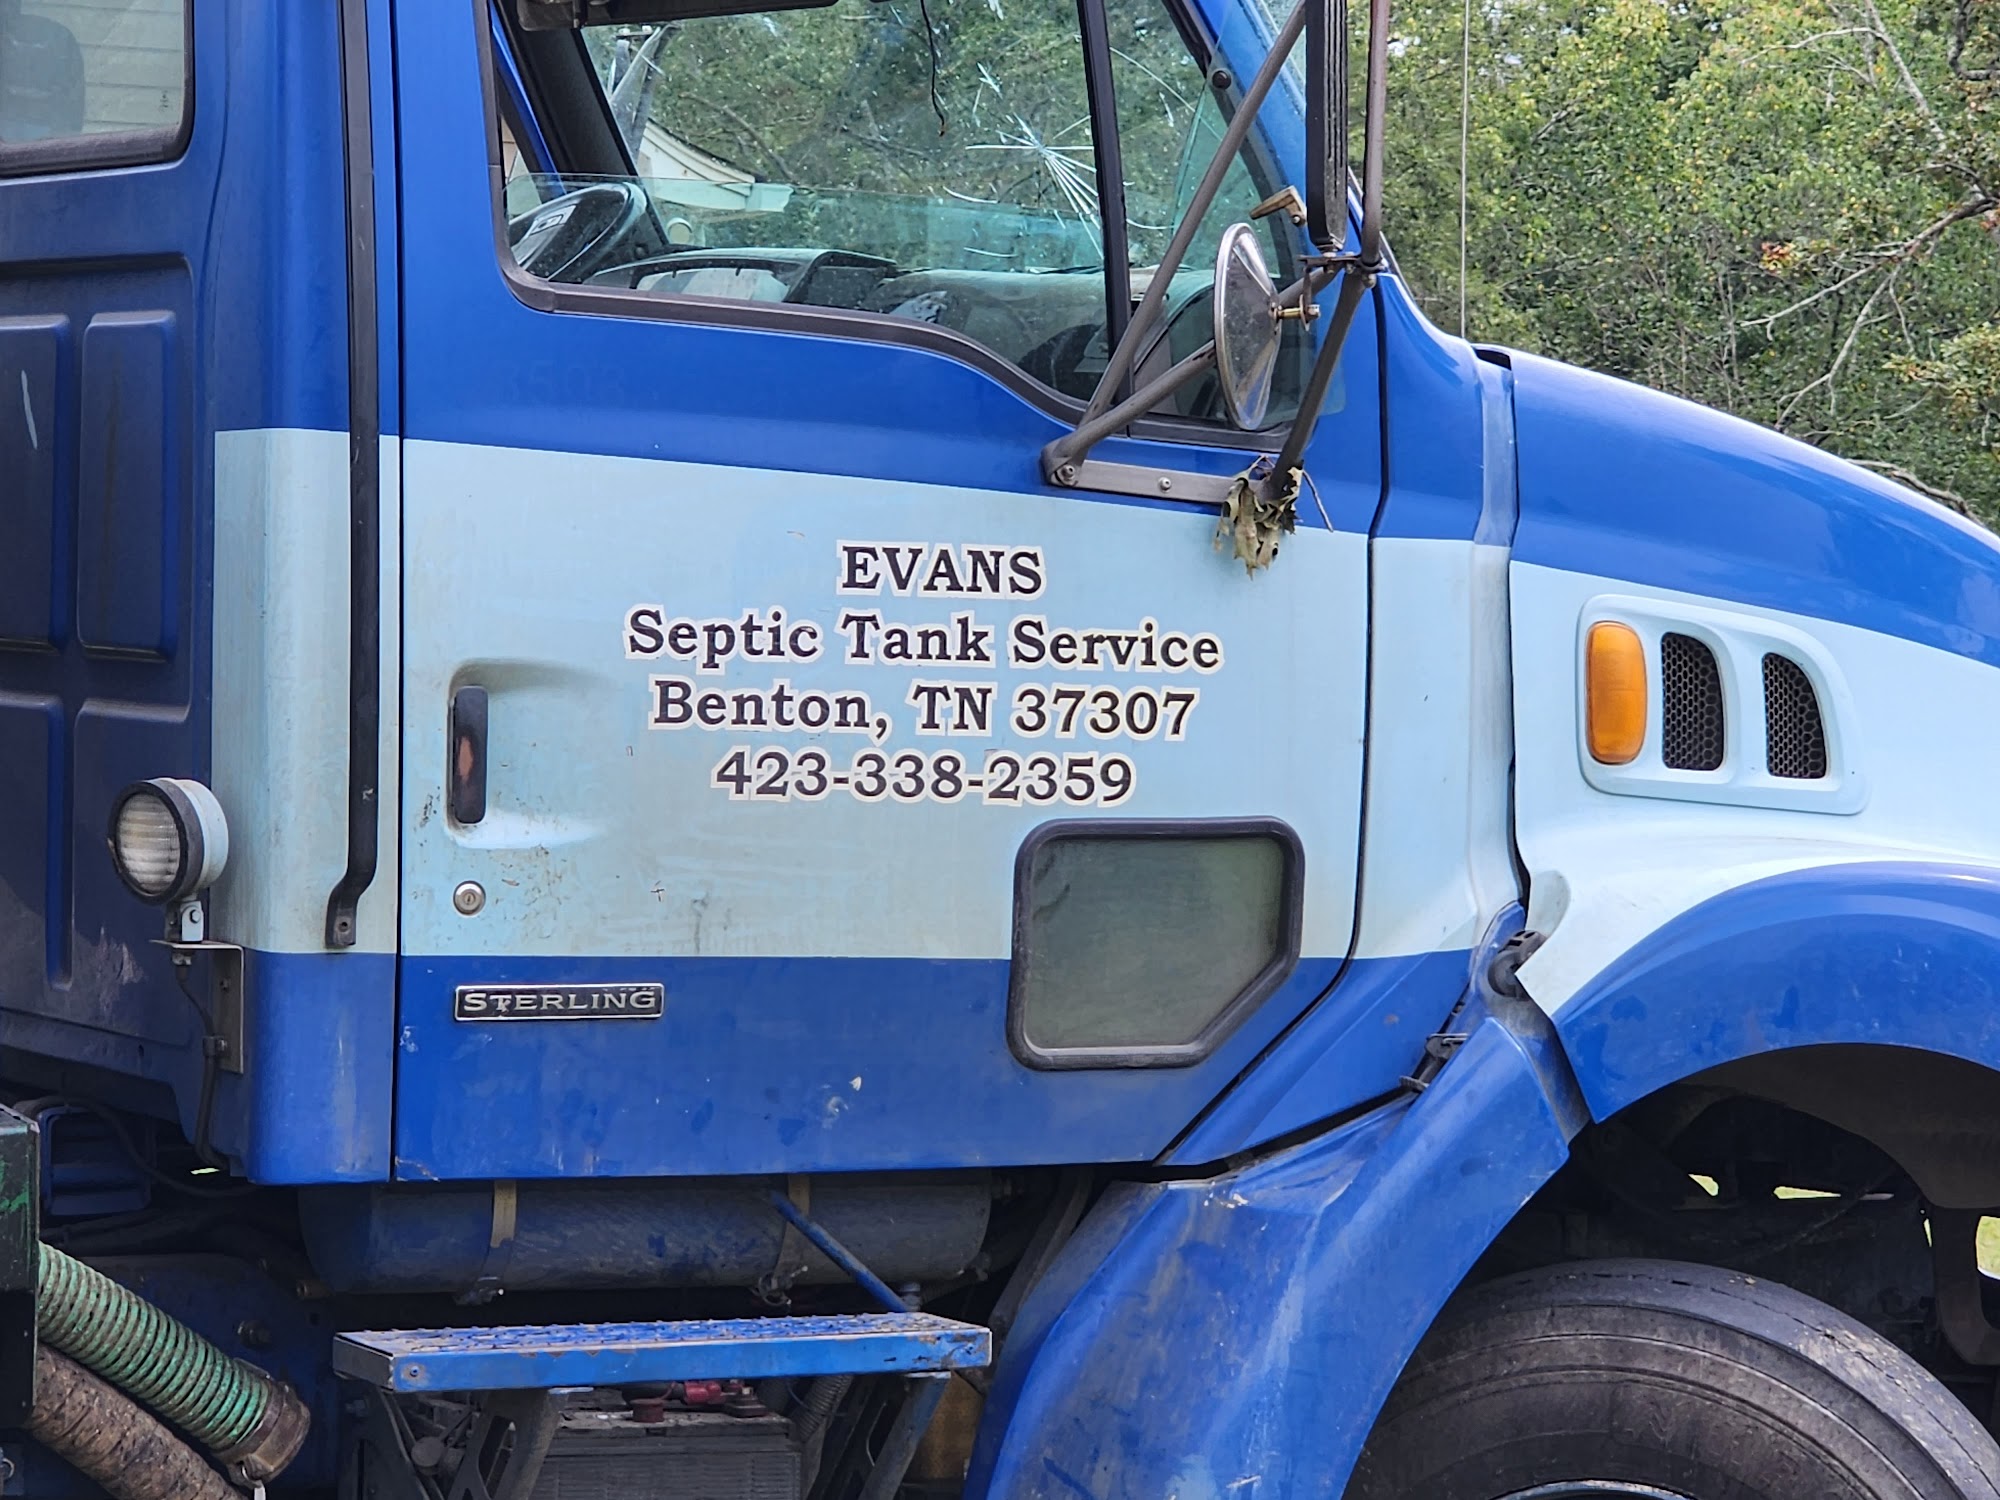 Evans Septic Tank Services Welcome Valley Rd, Benton Tennessee 37307